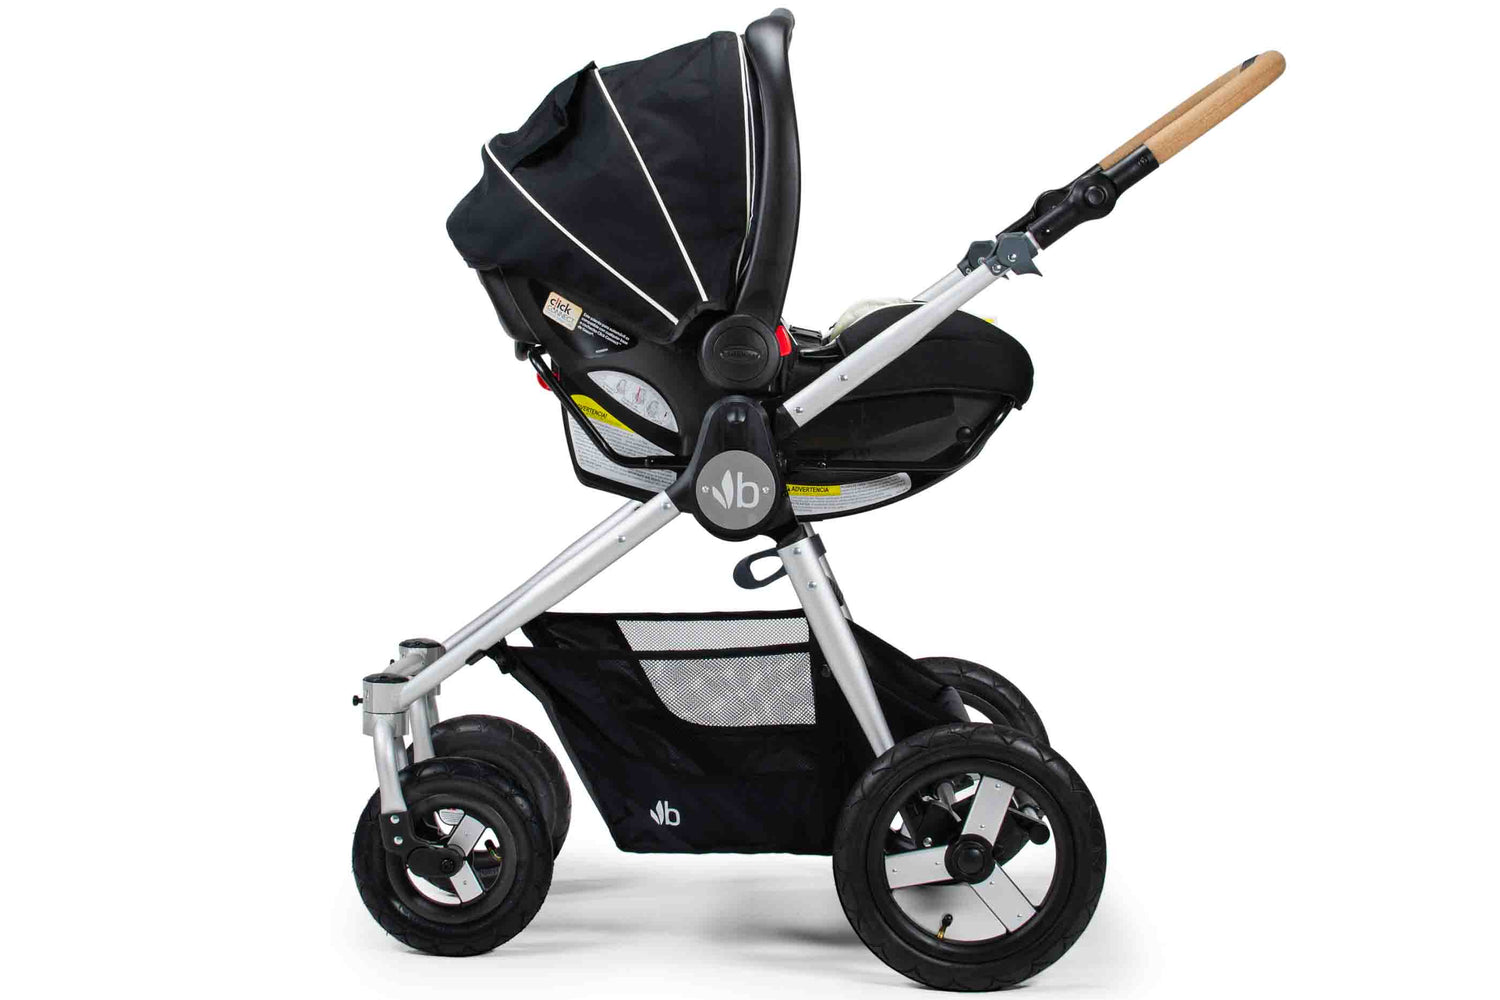 graco car seat that fits in stroller